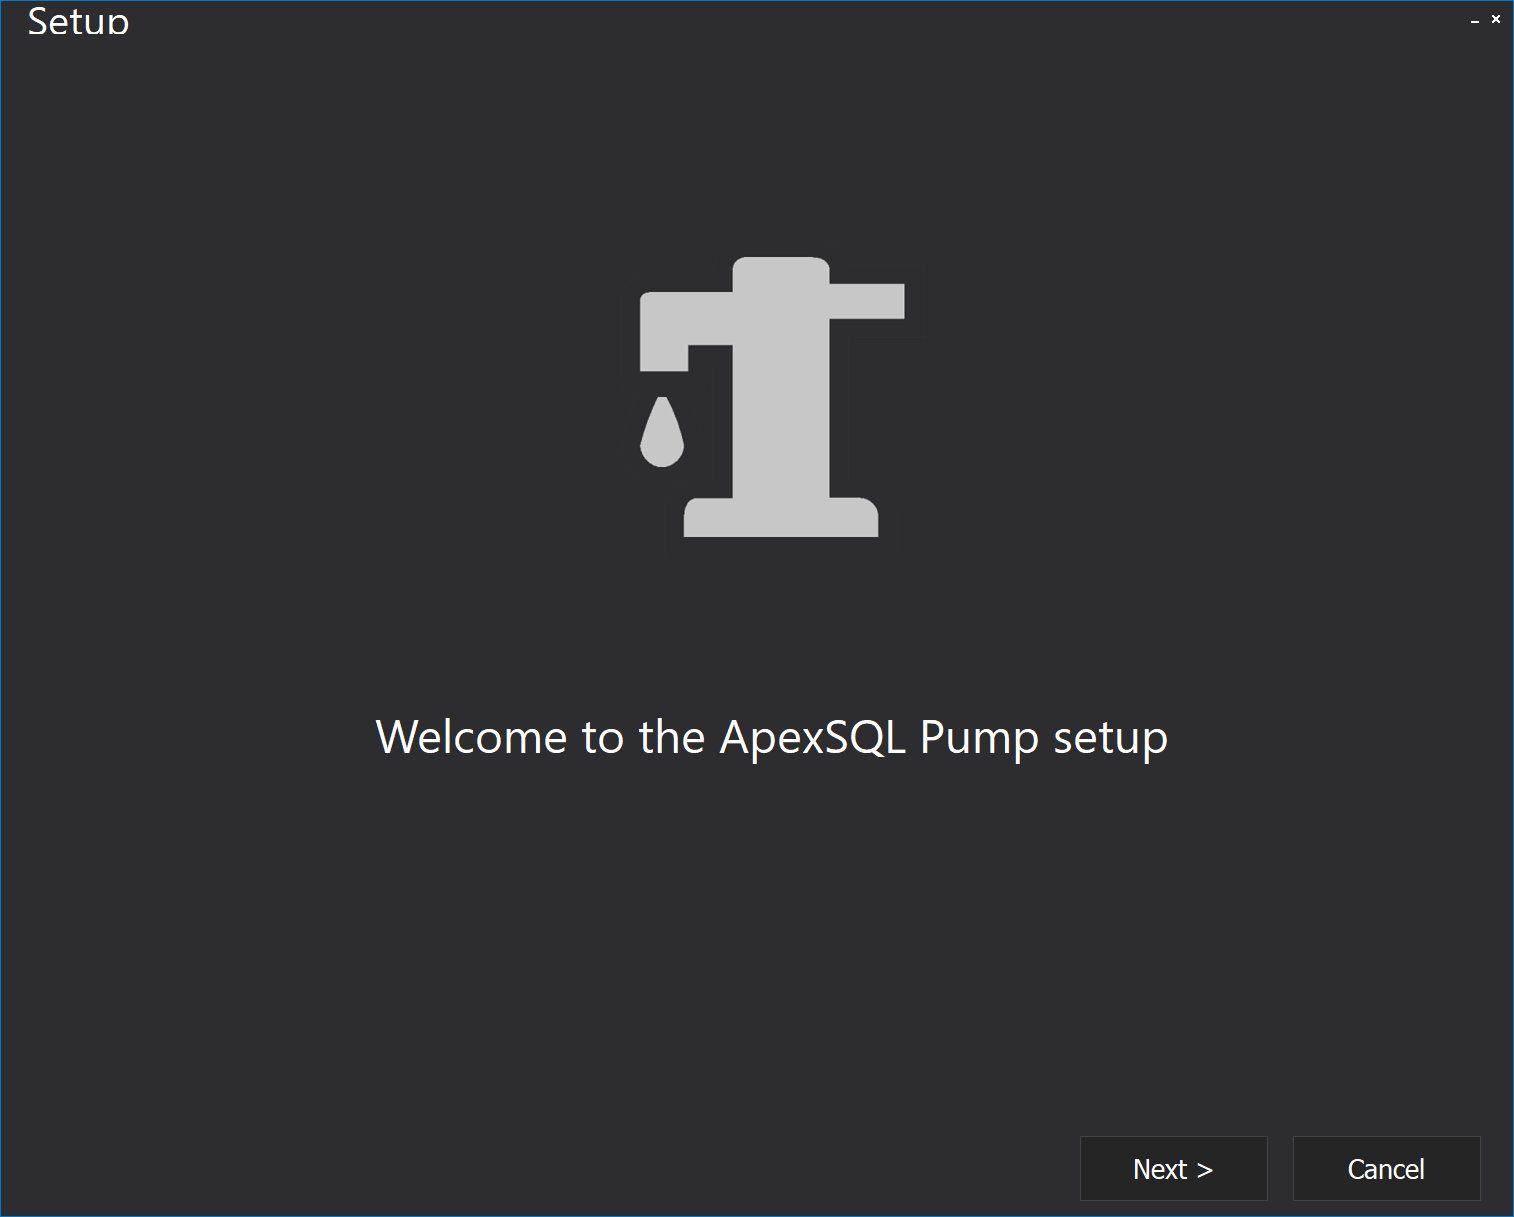 Welcome screen in the ApexSQL Pump installation wizard